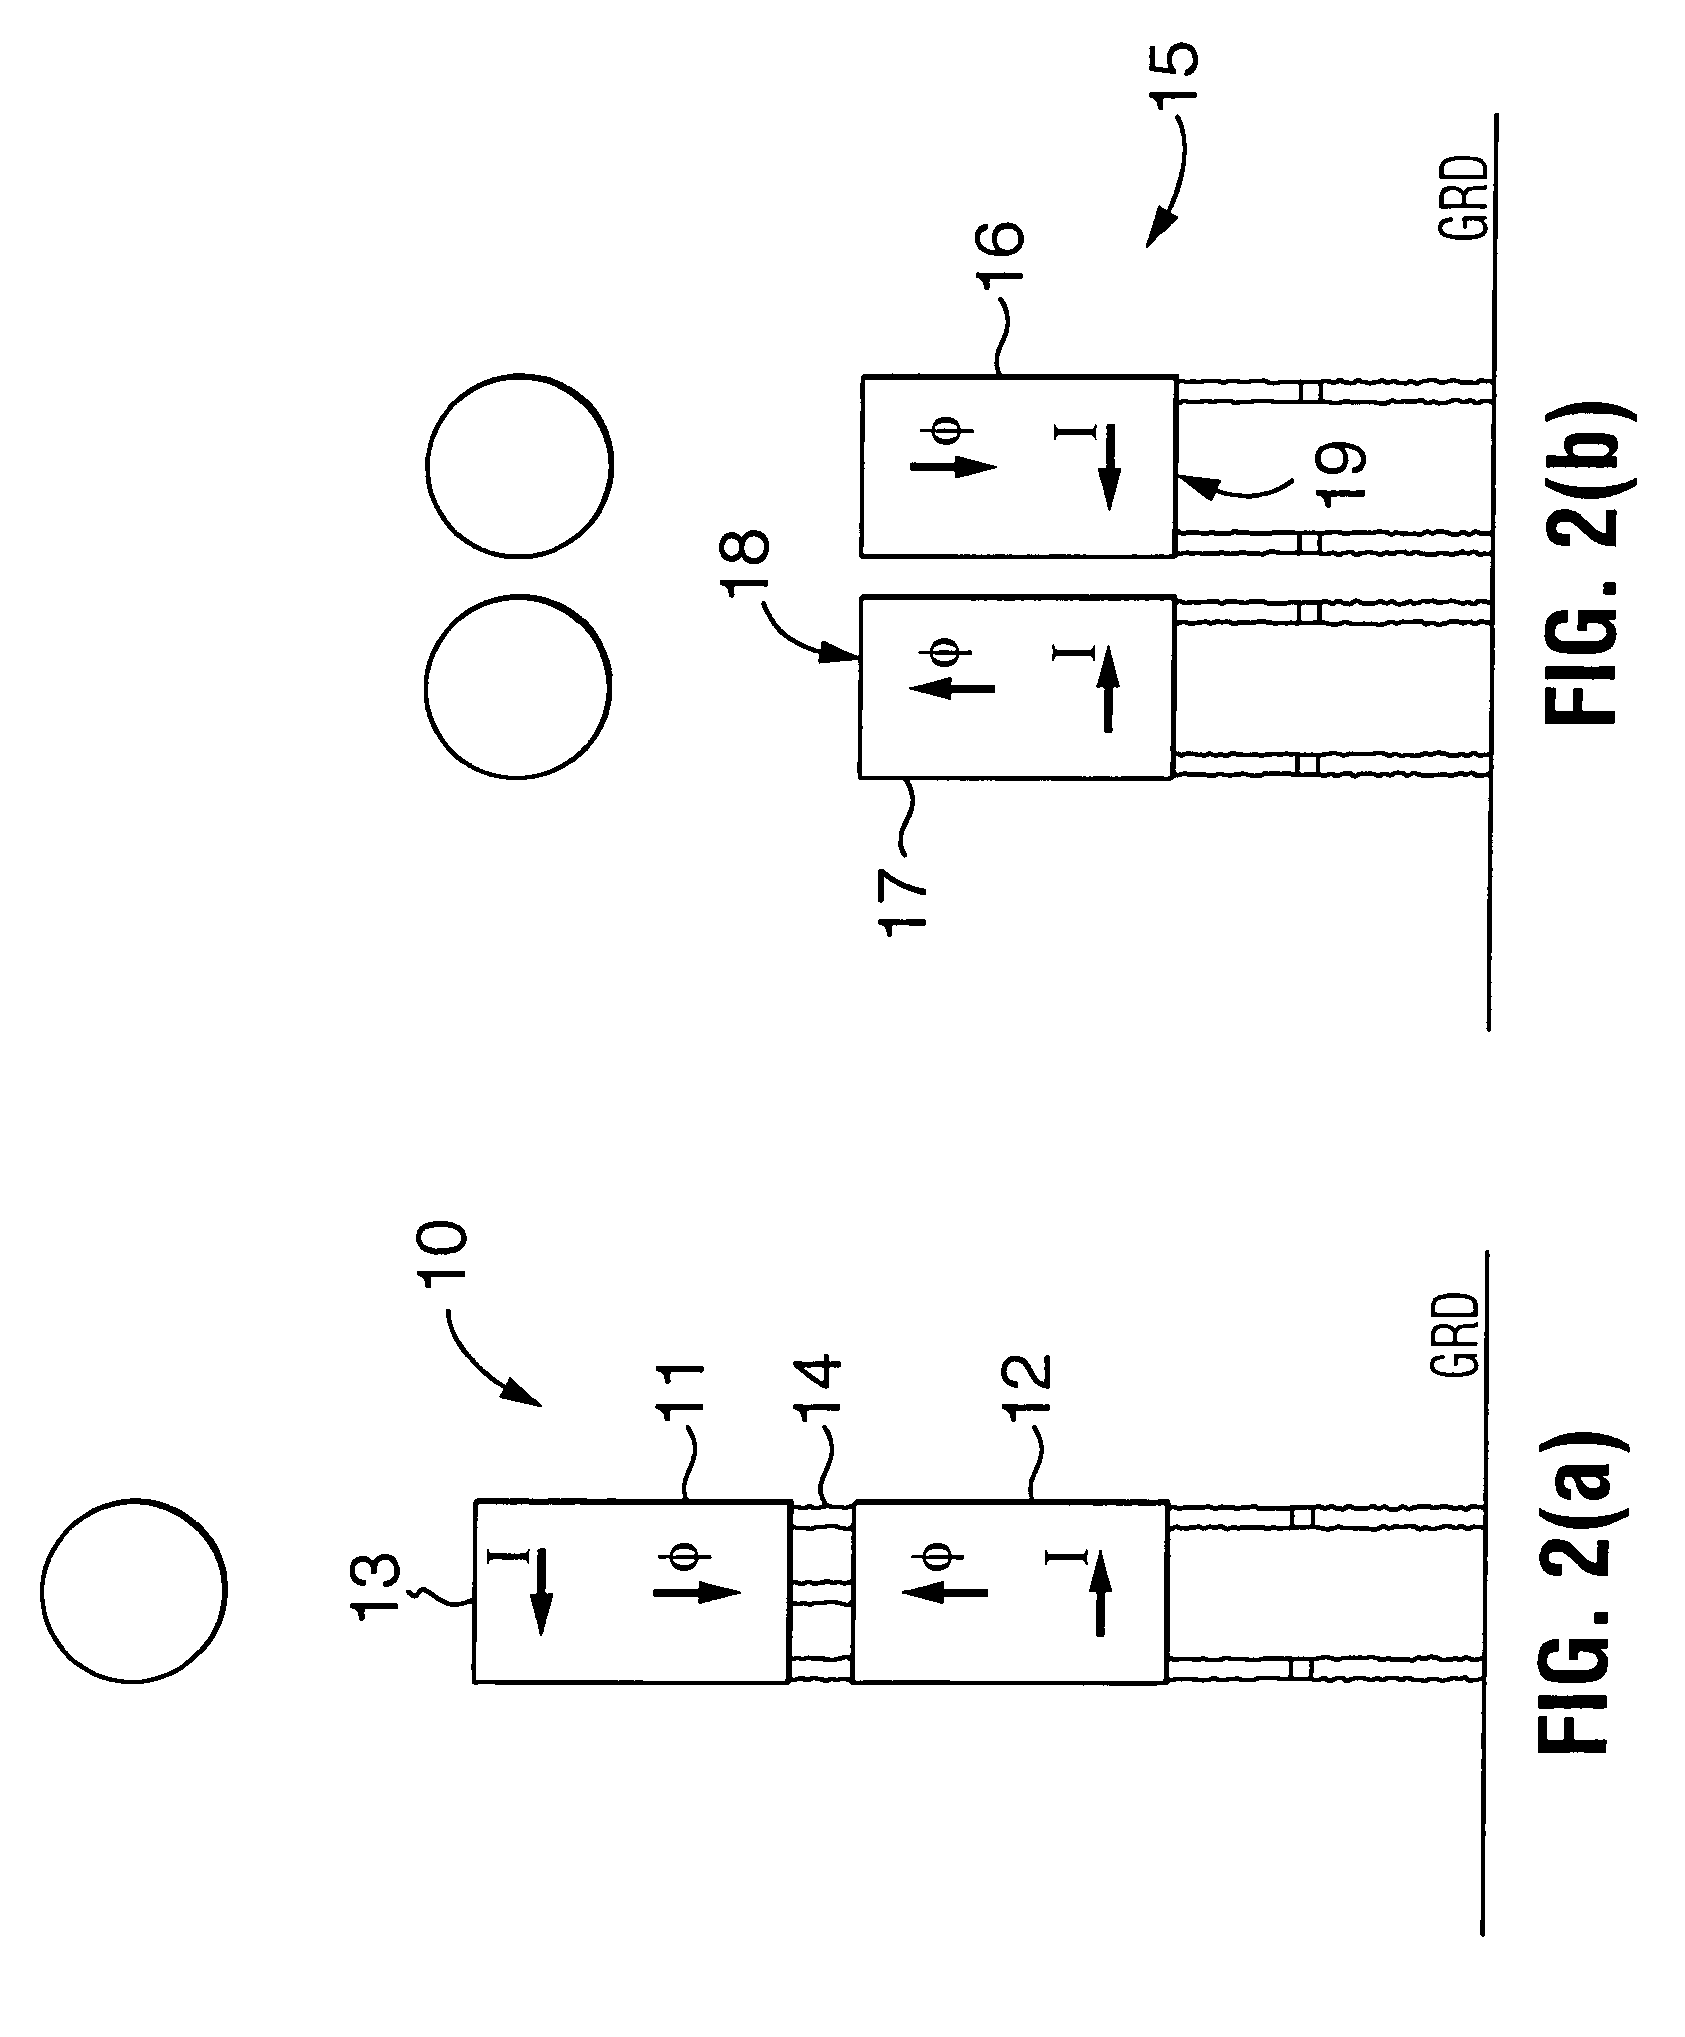 Method for magnetic field reduction using the decoupling effects of multiple coil systems